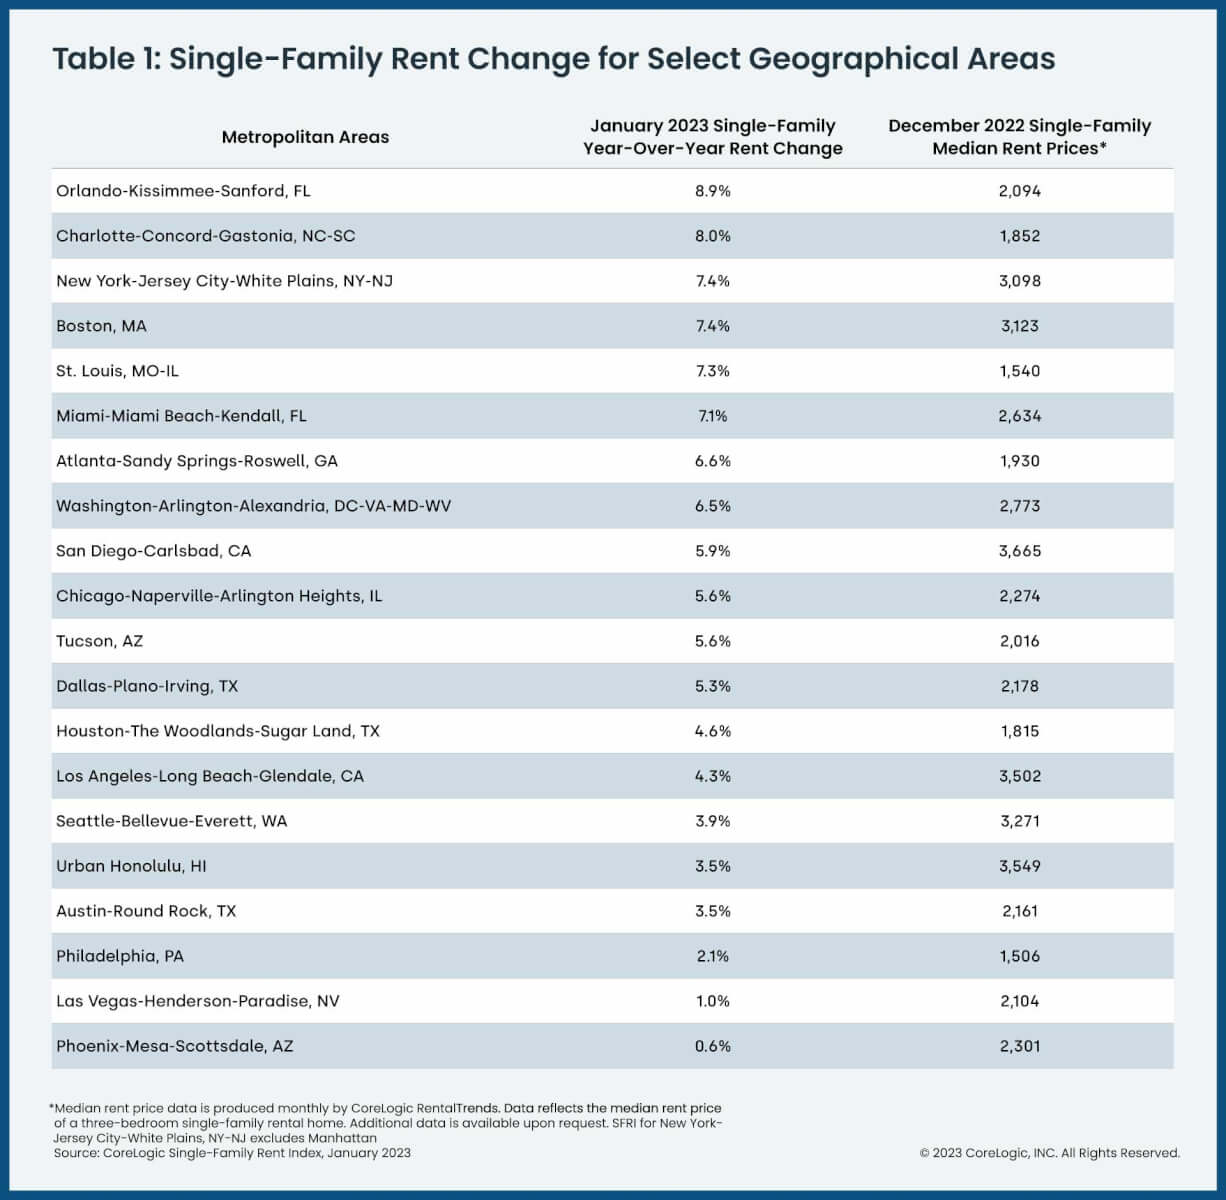 Single-family rent changes for 20 select U.S. metro areas